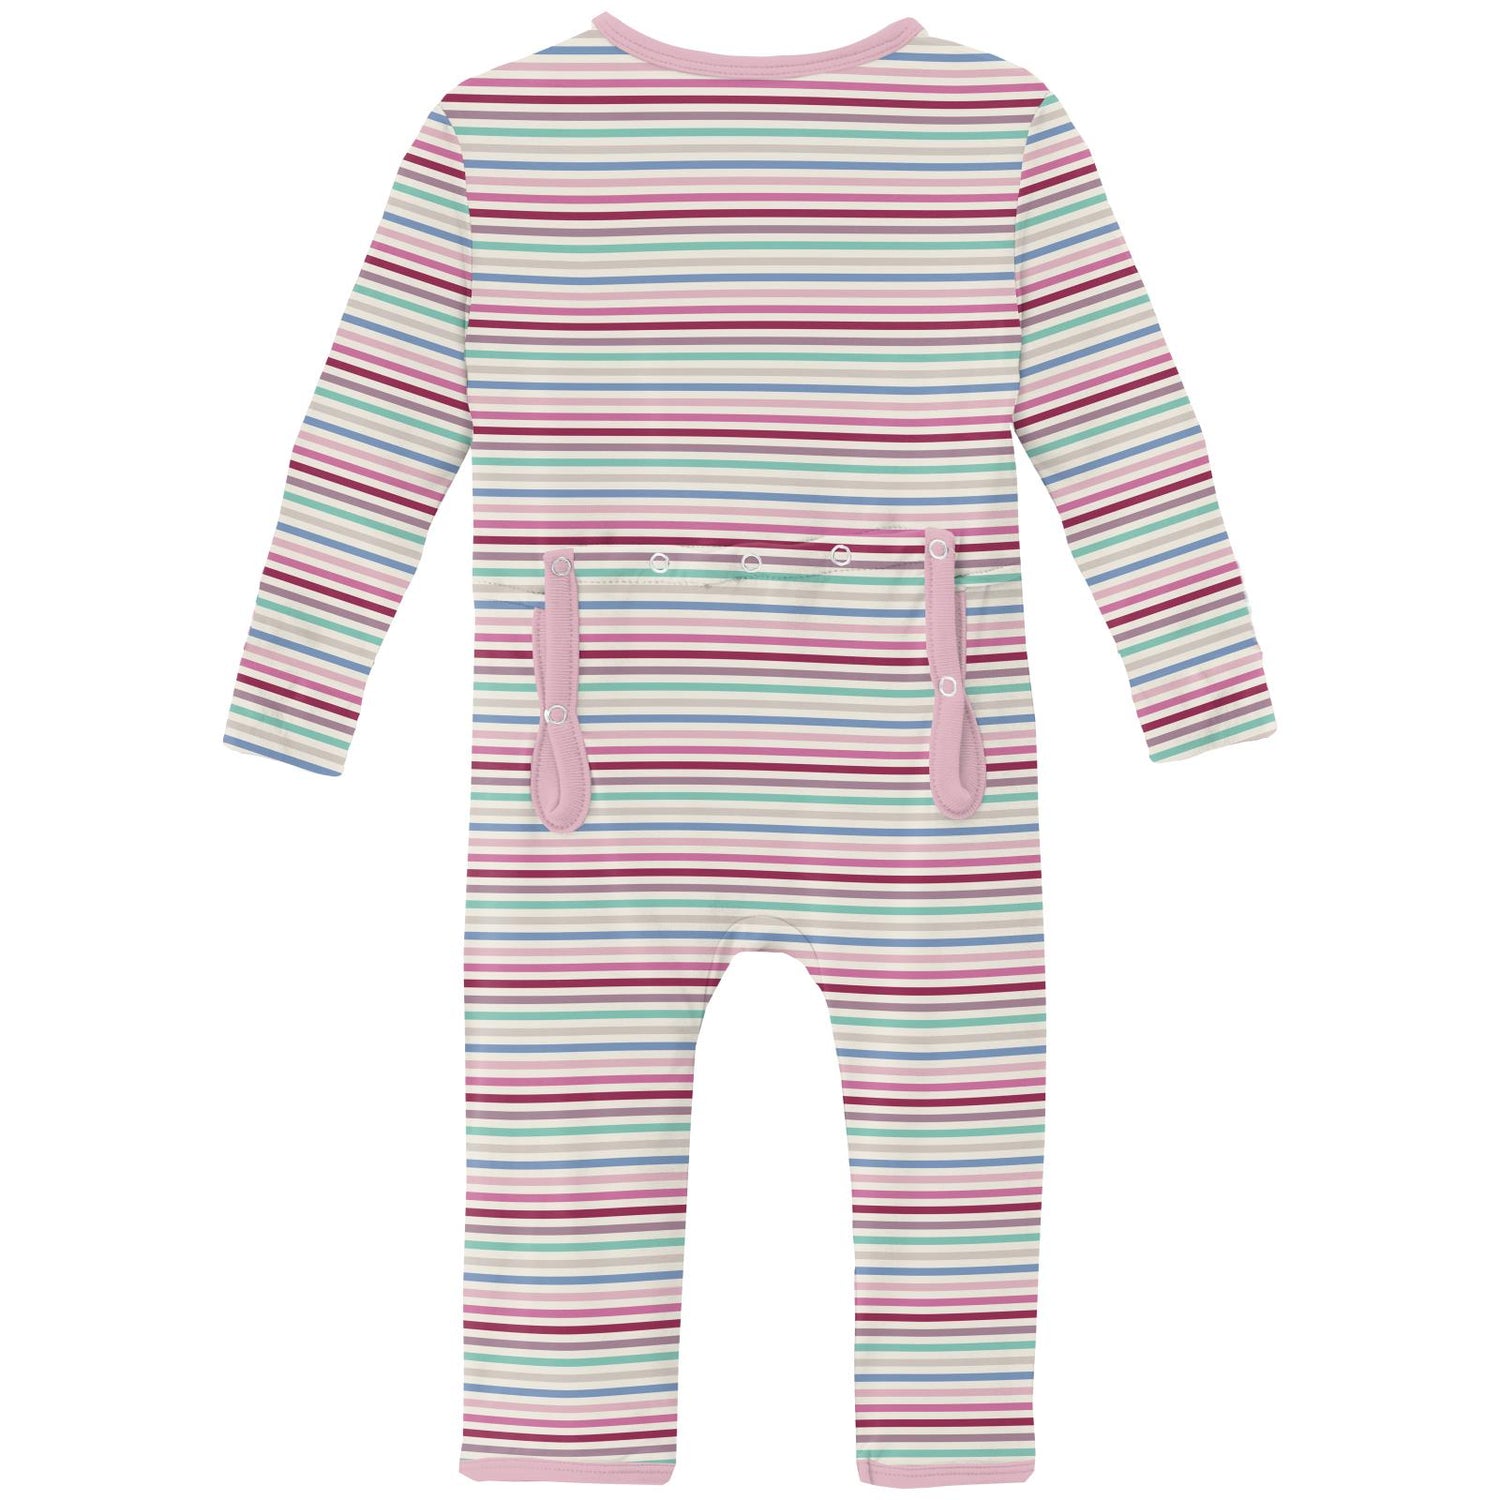 Print Coverall with 2 Way Zipper in Make Believe Stripe